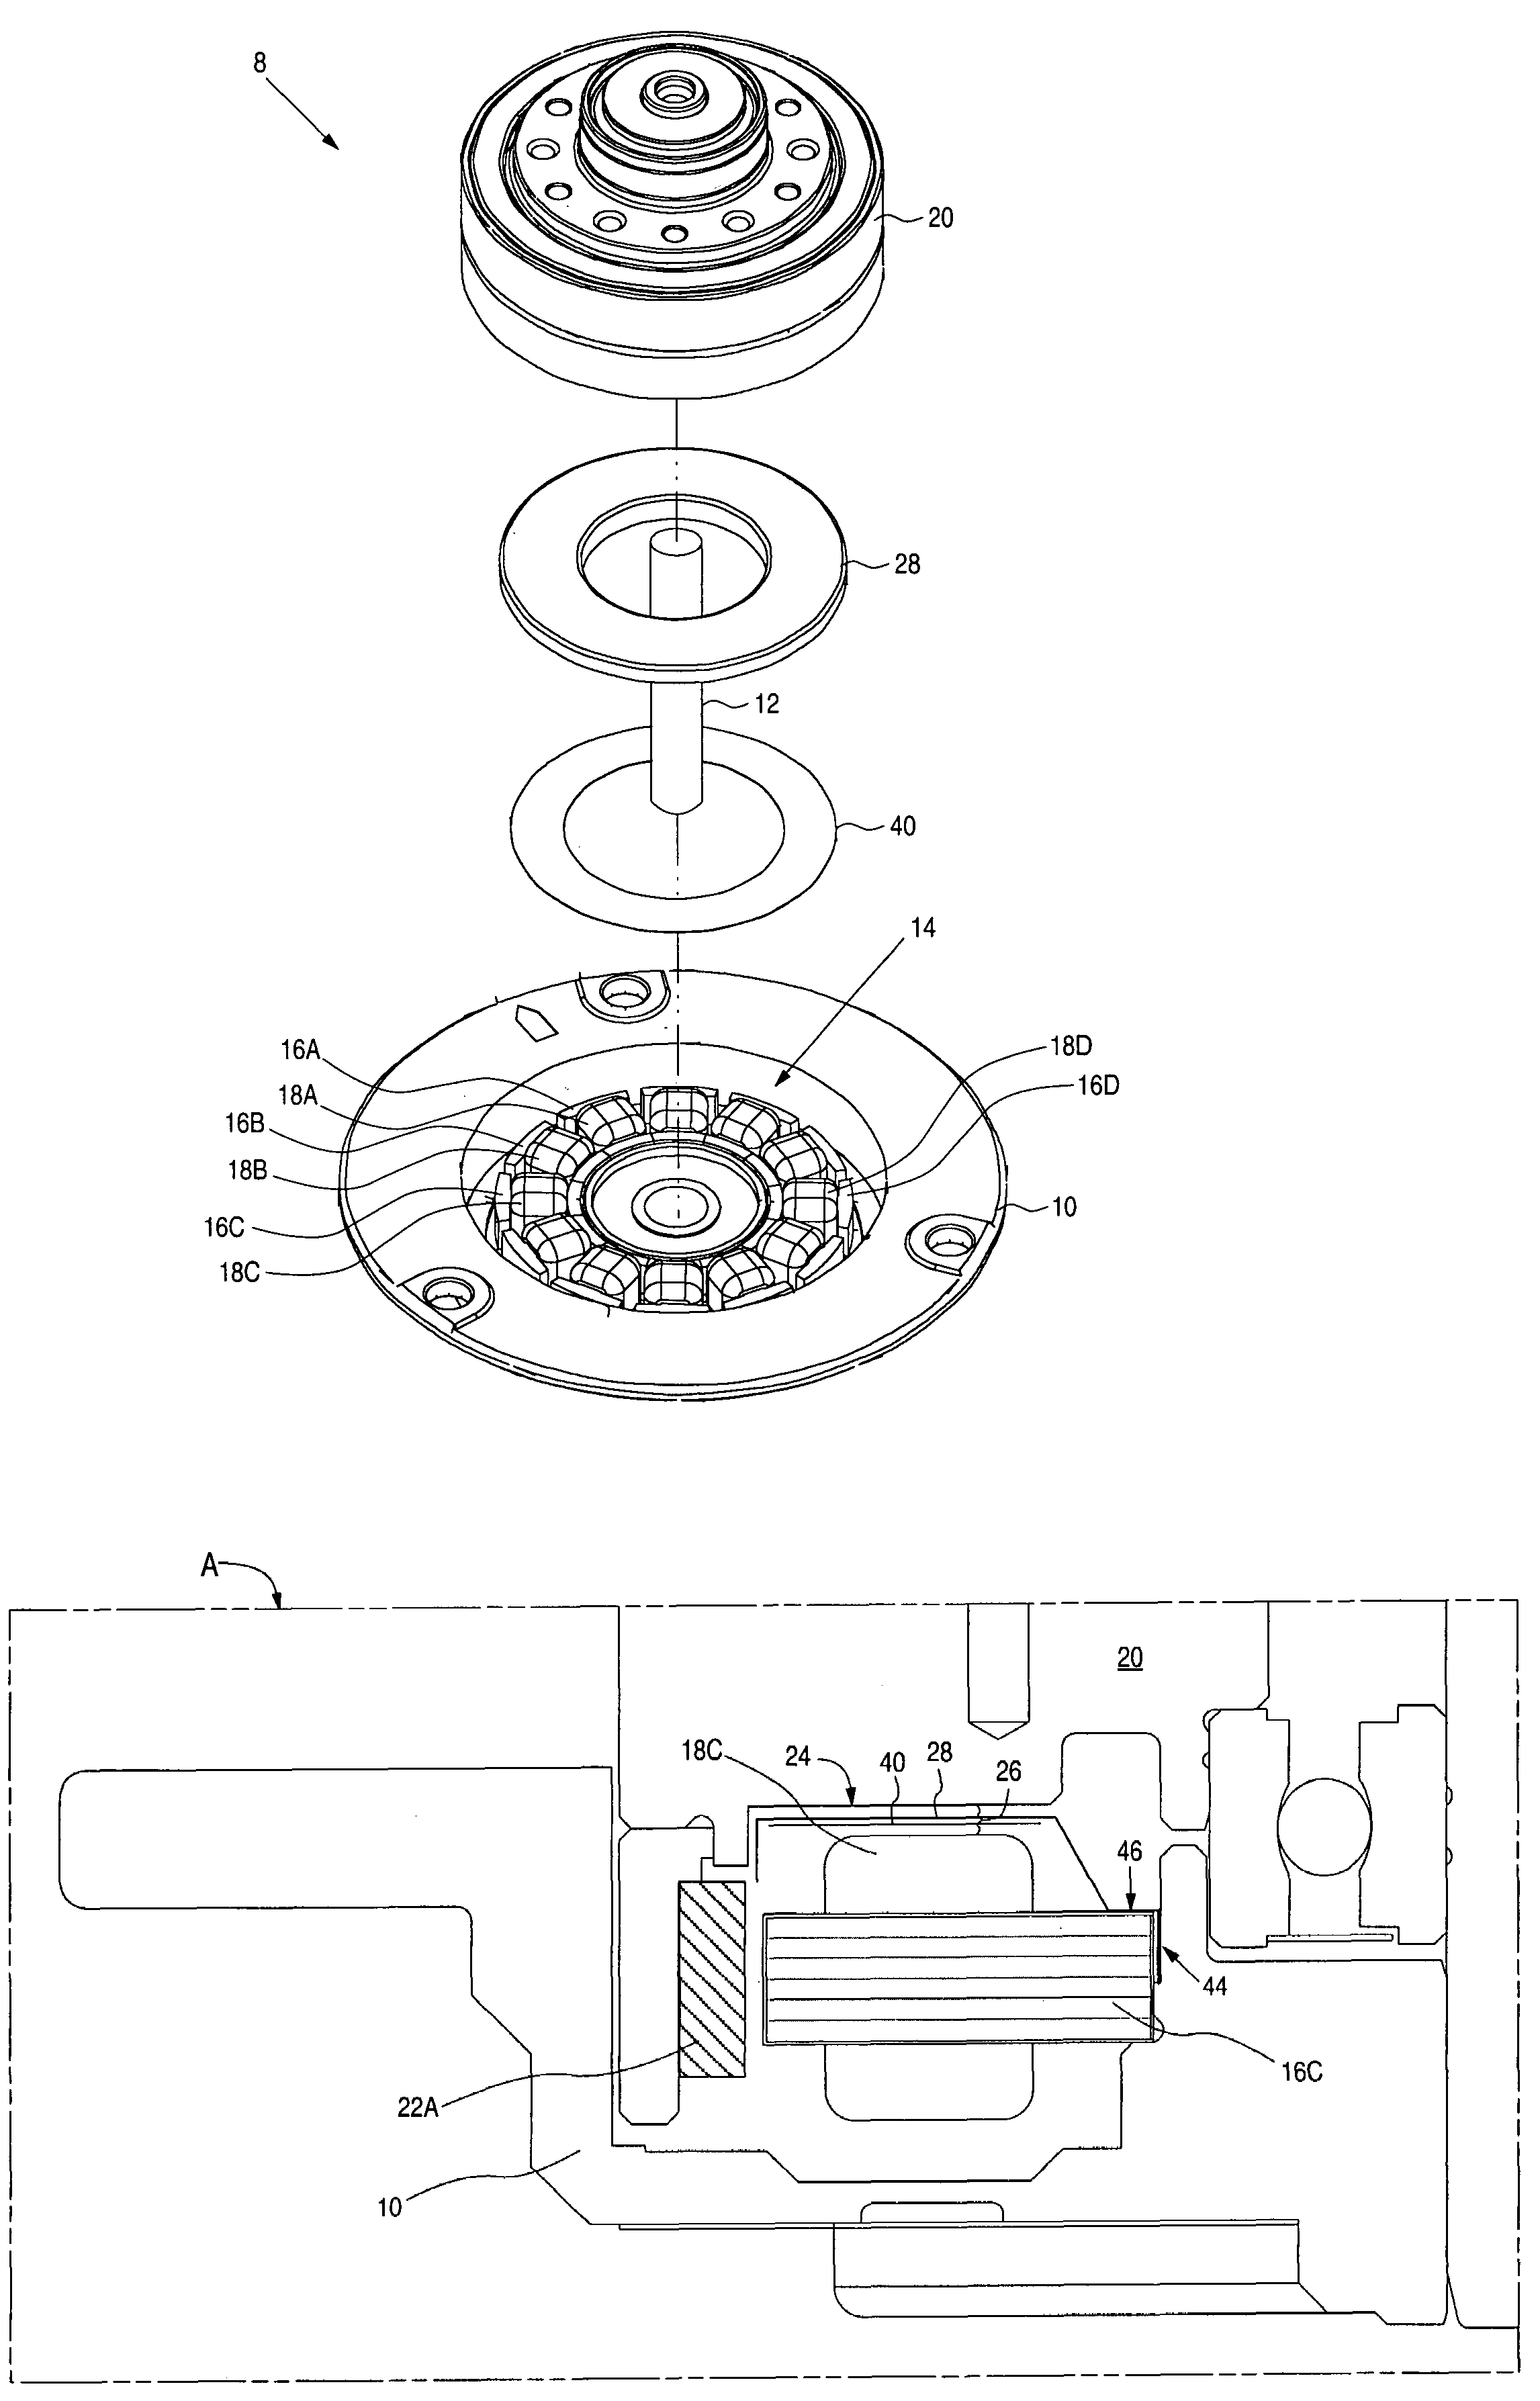 Disk drive comprising a spindle motor having a windings shield for reduced disk voltage coupling